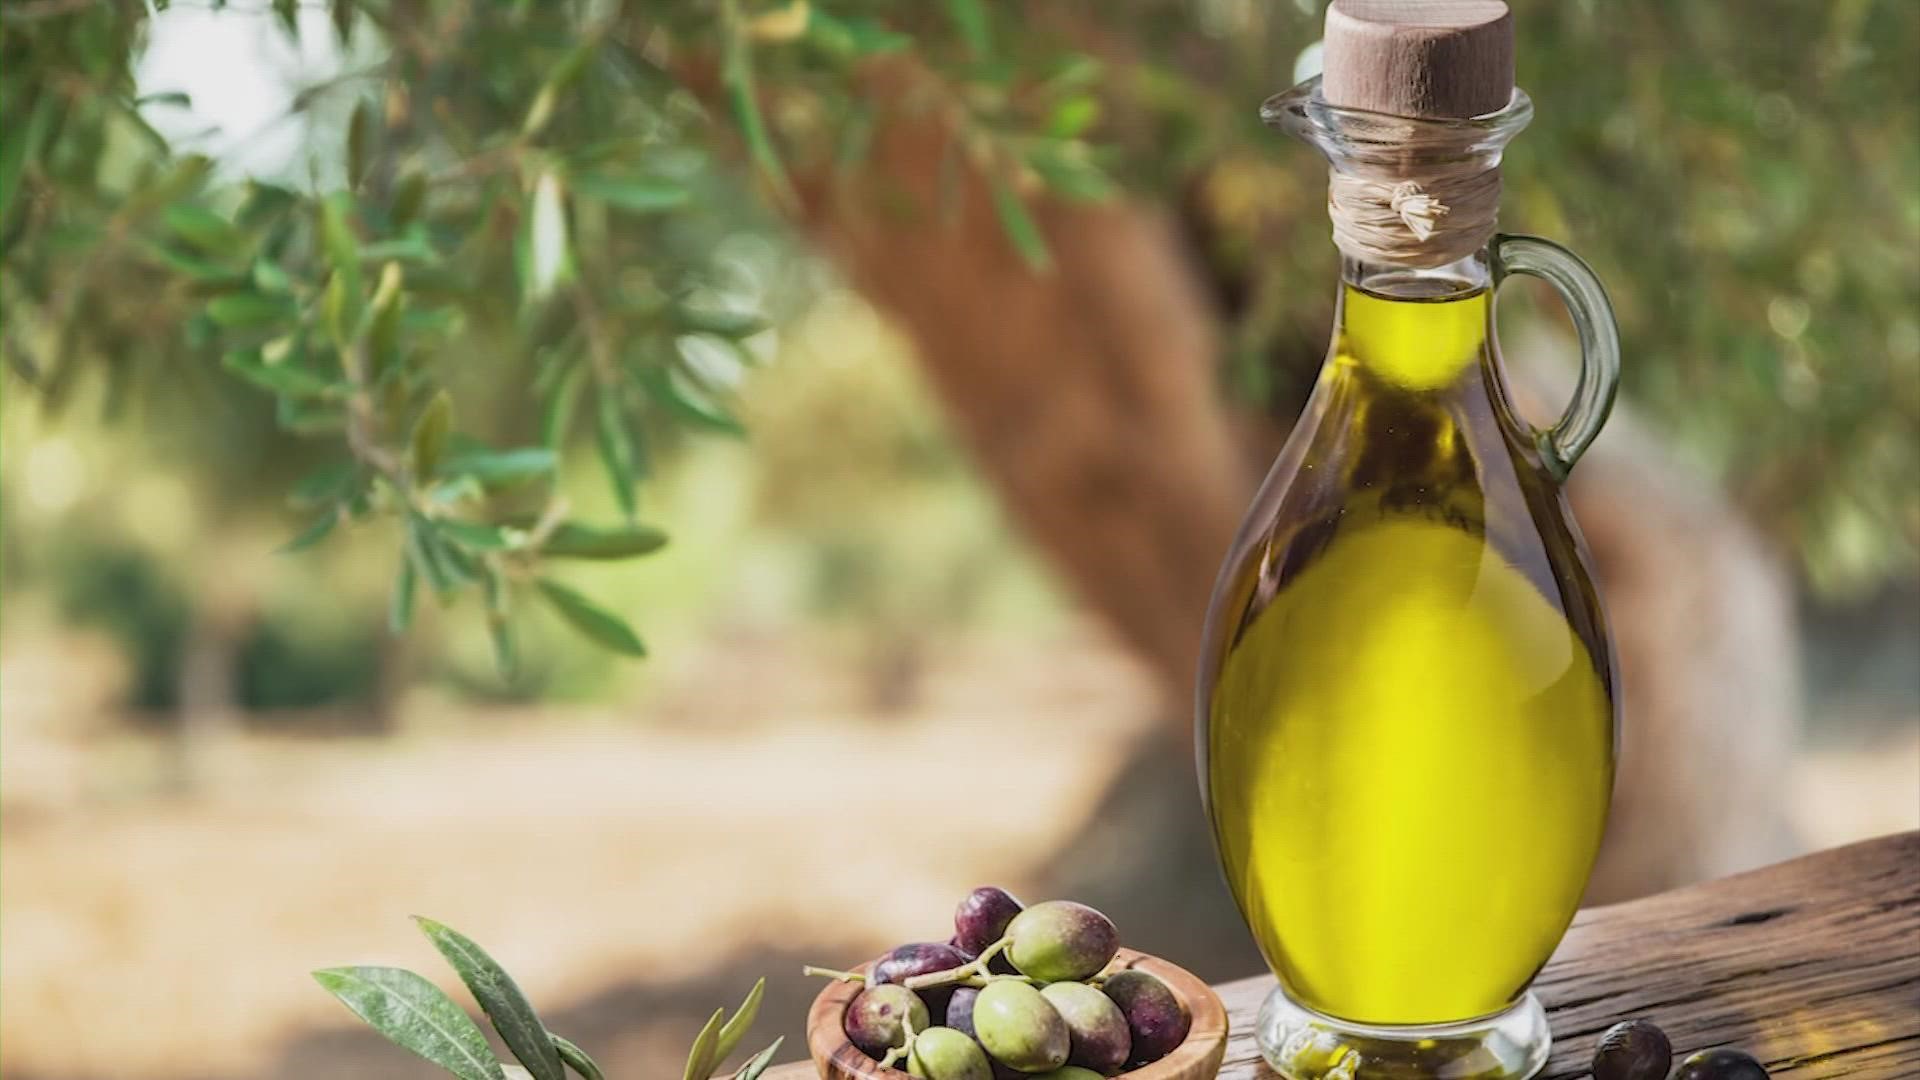 The fact that olive oil is good for you is not exactly new, but we are now getting a sense of just how much it can help our health.